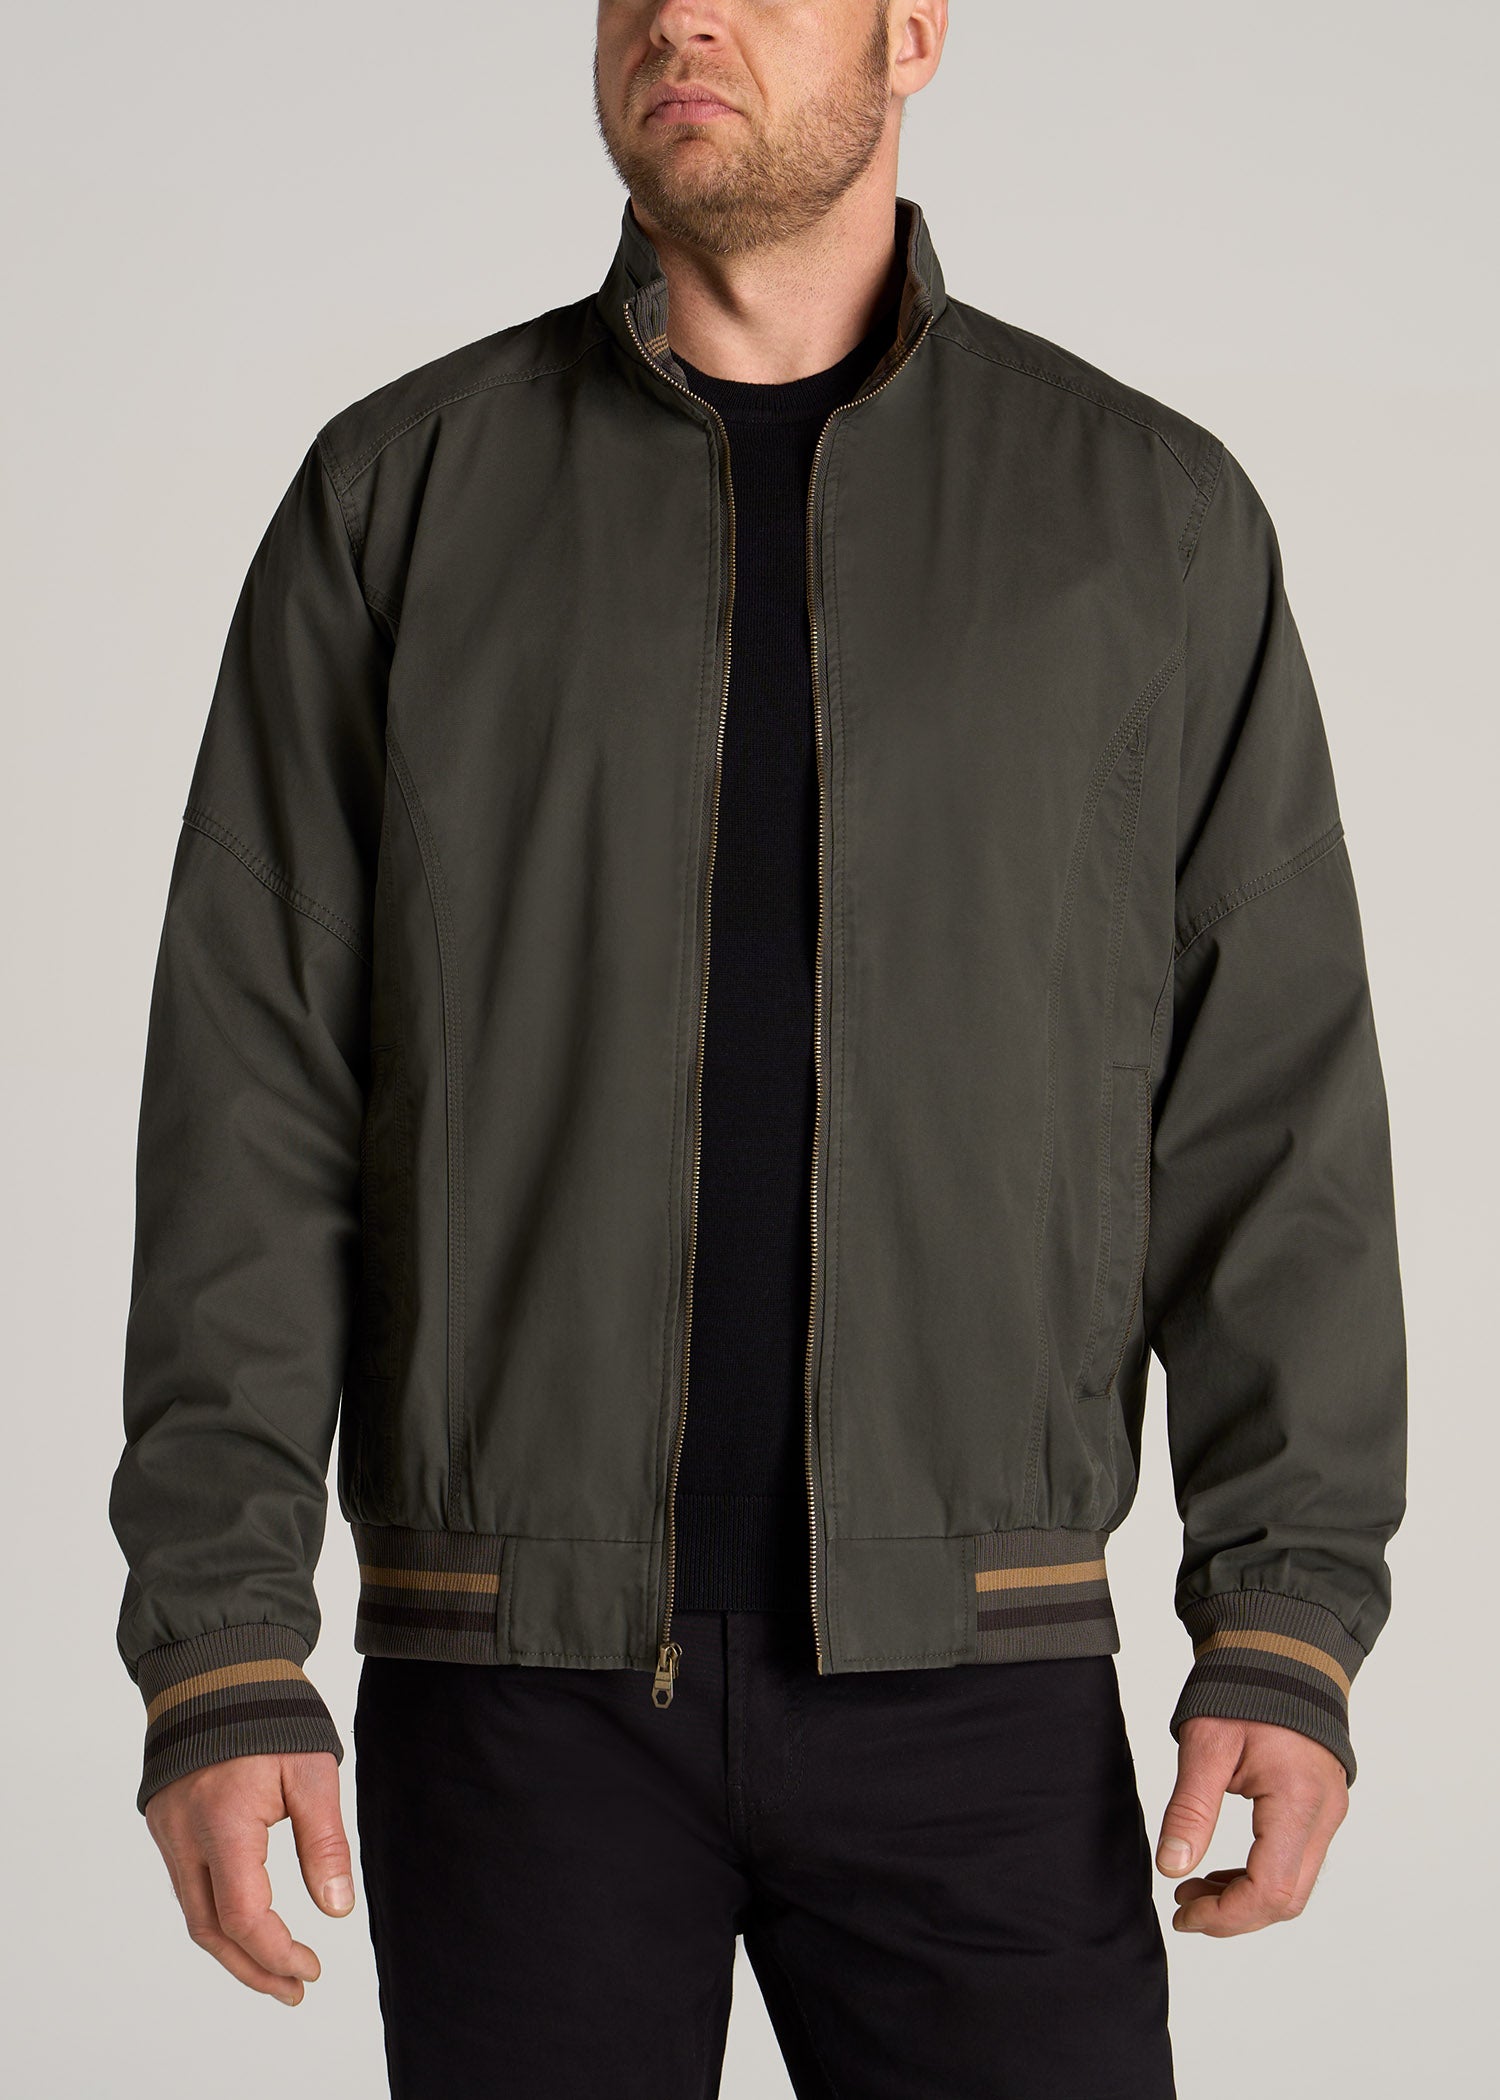 LJ&S Cotton Bomber Jackets for Tall Men in Olive Green